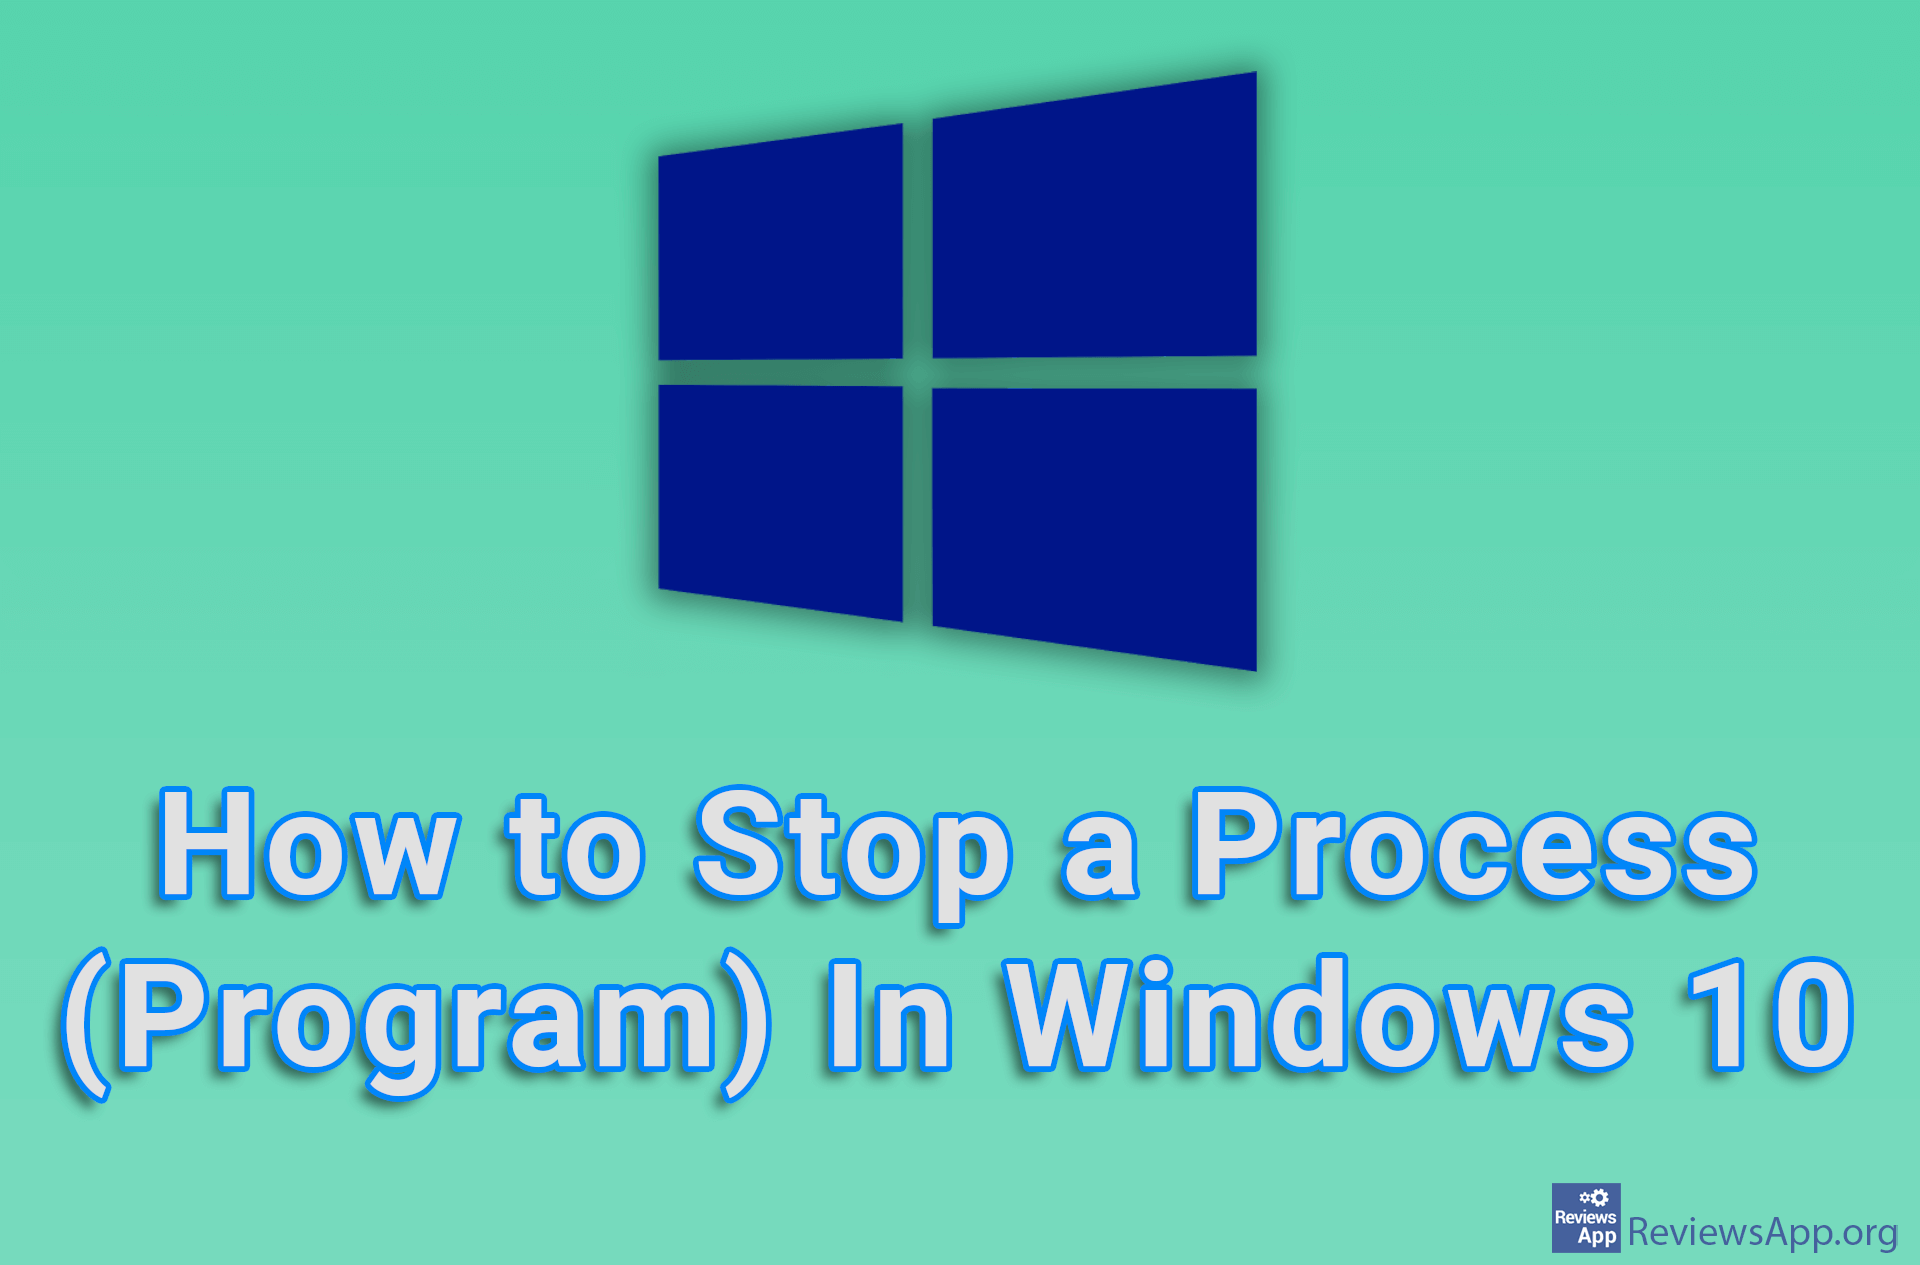 How to Stop a Process (Program) In Windows 10